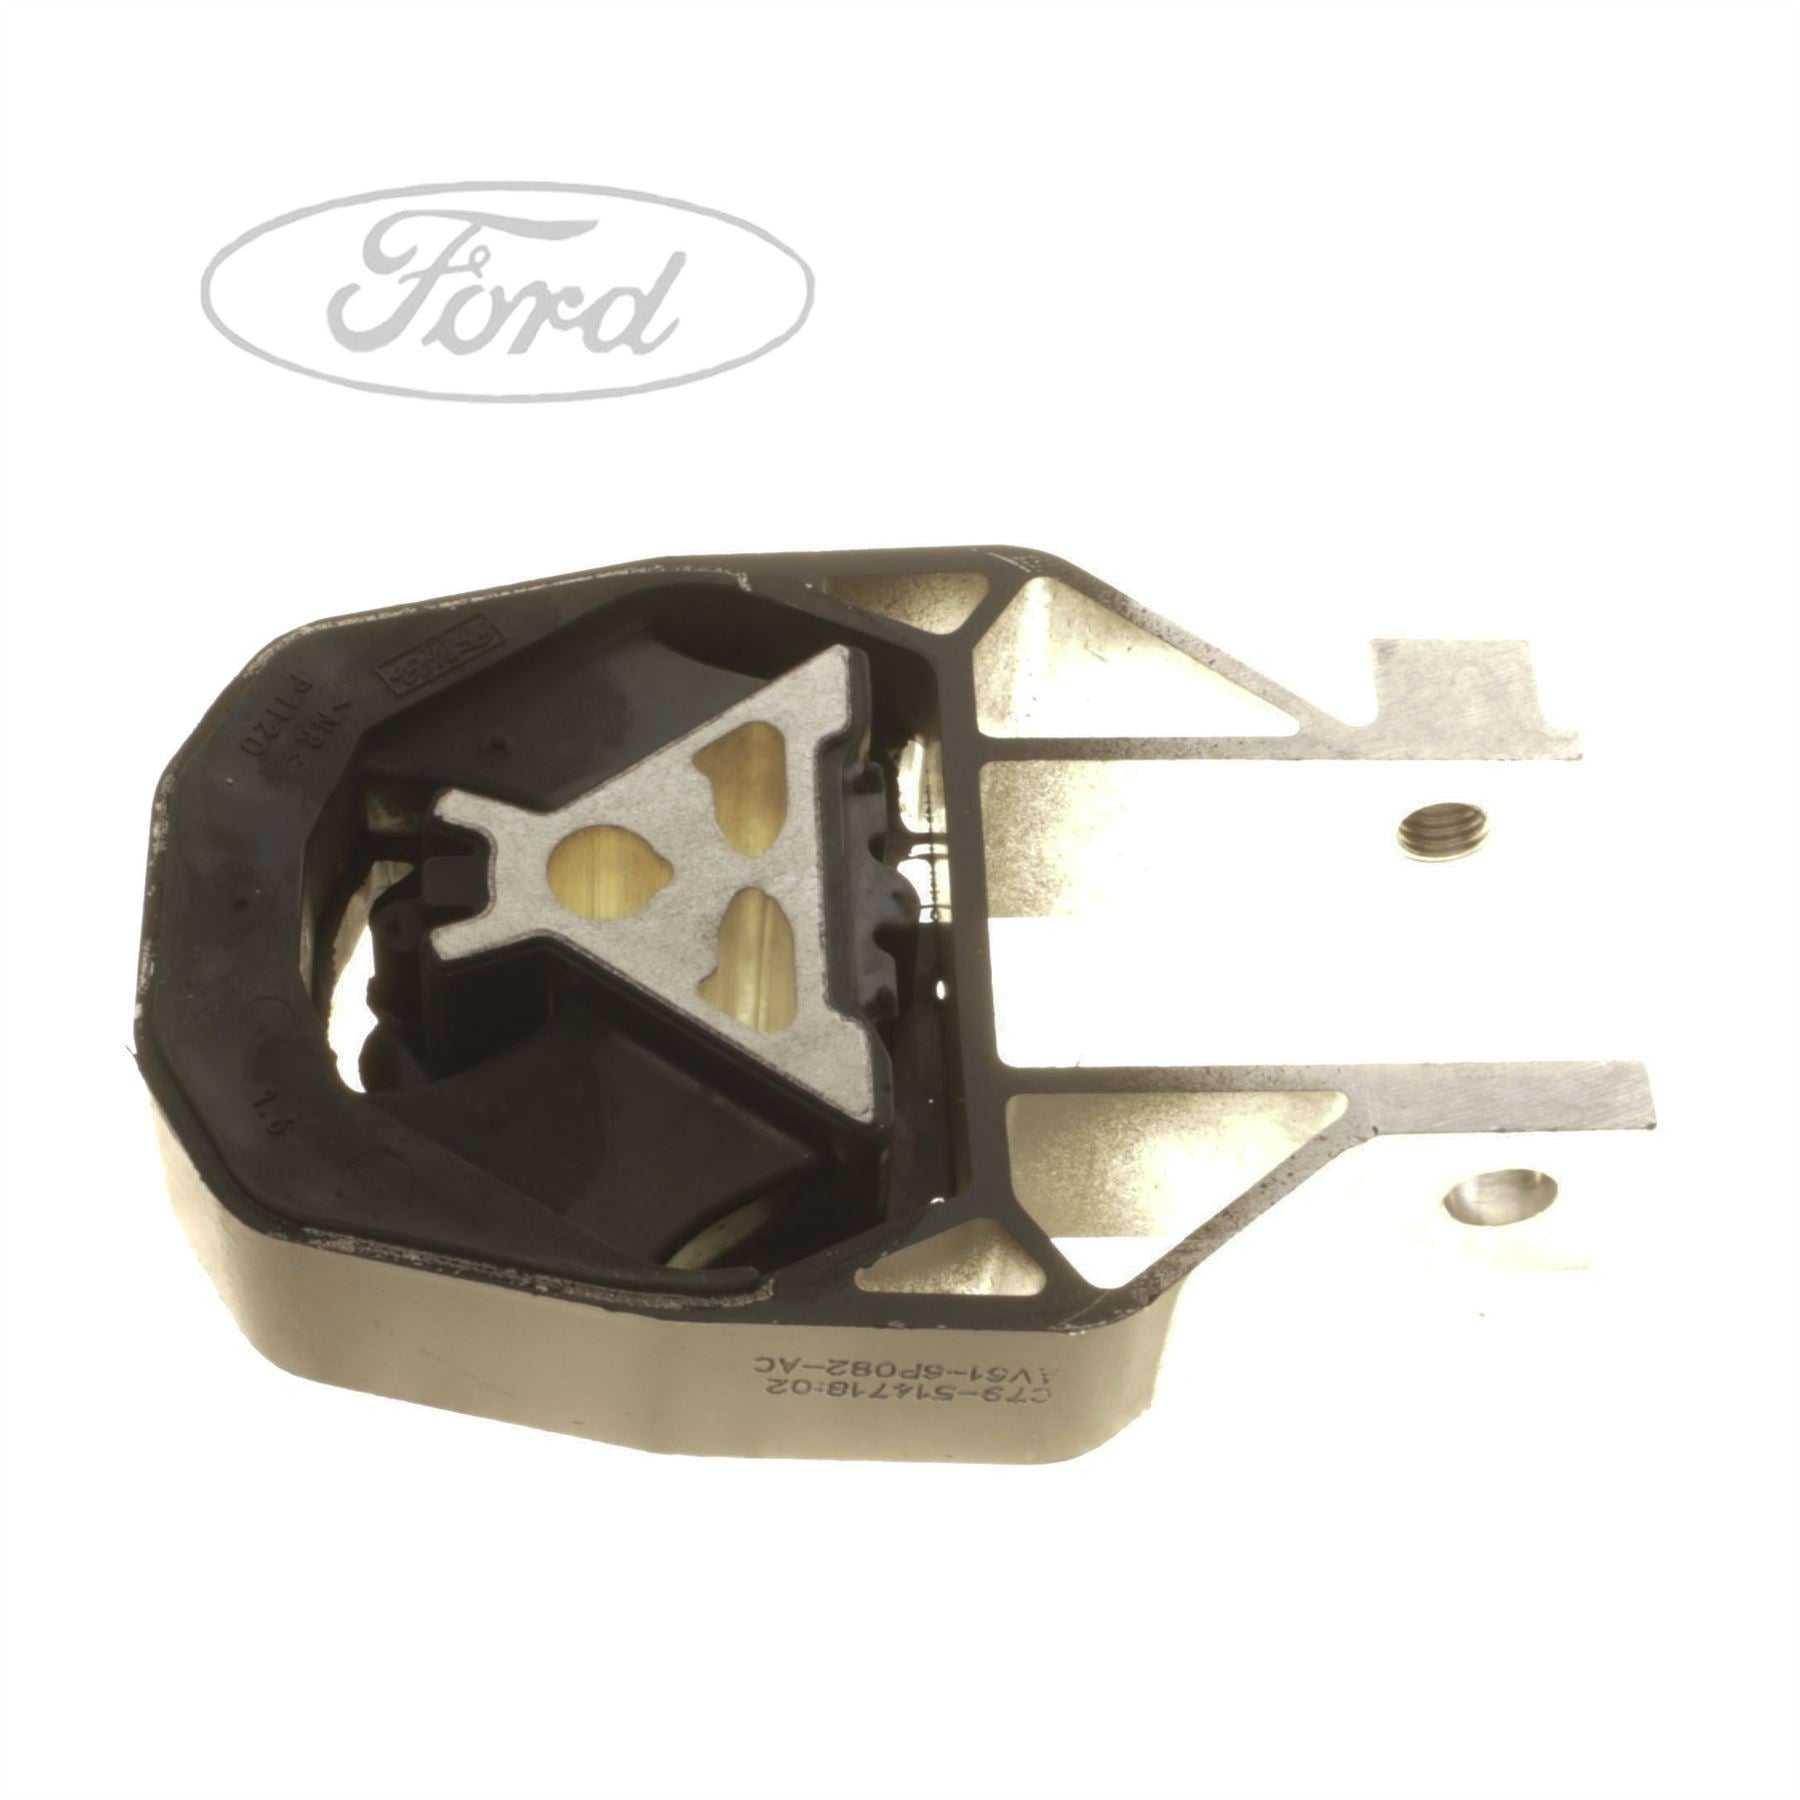 Ford, TRANSMISSION MOUNTING HOUSING